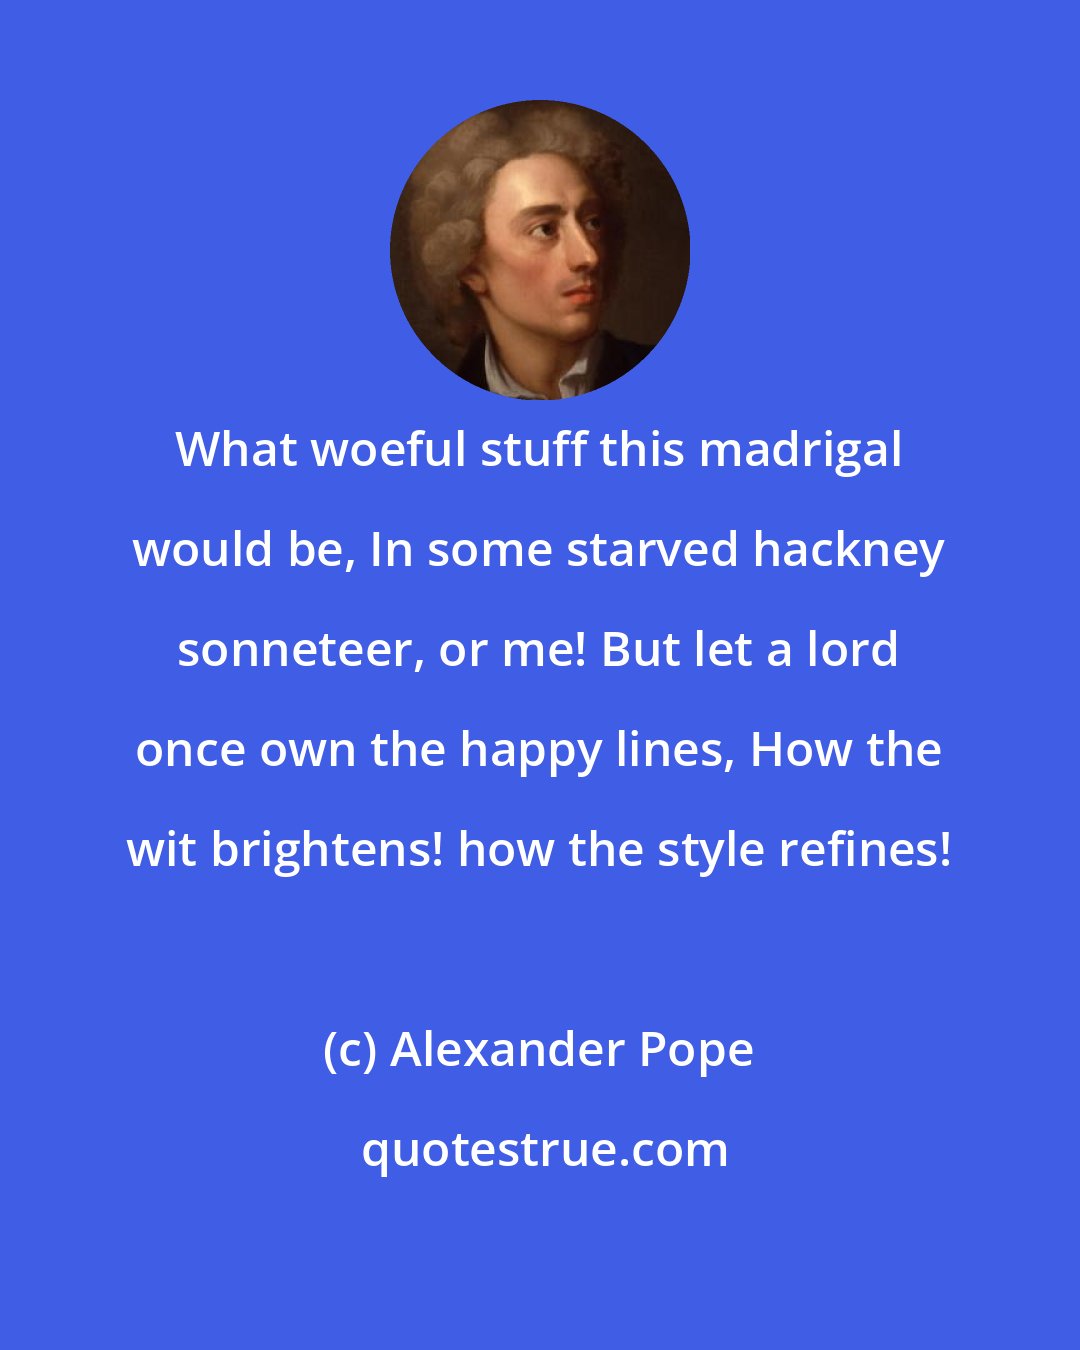 Alexander Pope: What woeful stuff this madrigal would be, In some starved hackney sonneteer, or me! But let a lord once own the happy lines, How the wit brightens! how the style refines!